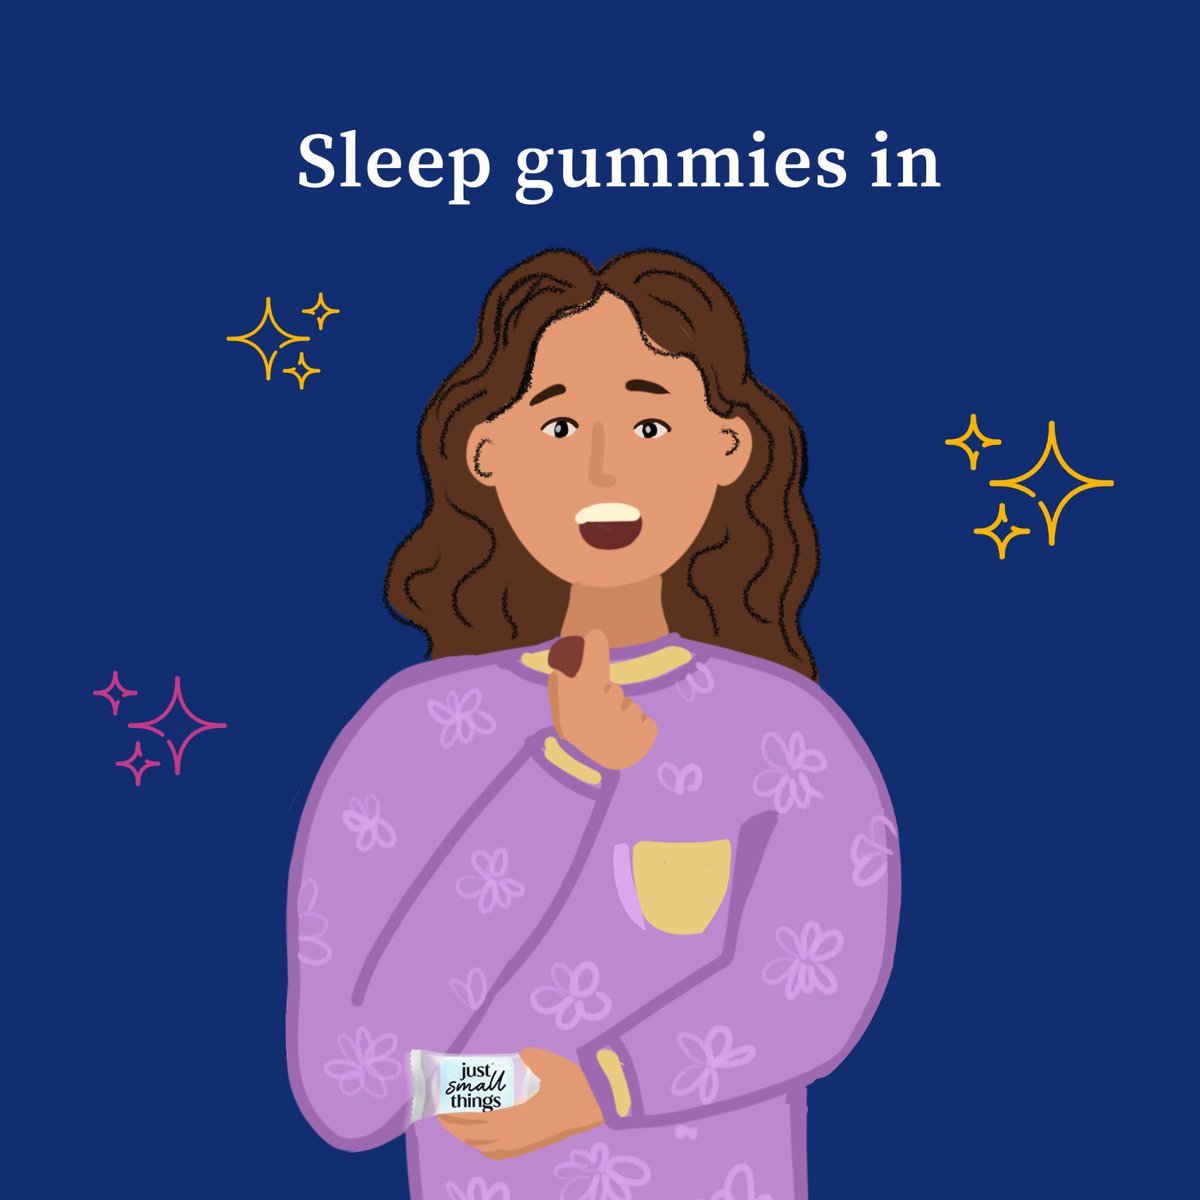 Call it a day and sleep fast with our Sleep Gummies by your side! 

#JST #JustSmallThings #gummies #sleepgummies #mealtonin #bettersleep #healthy #nutraceuticals